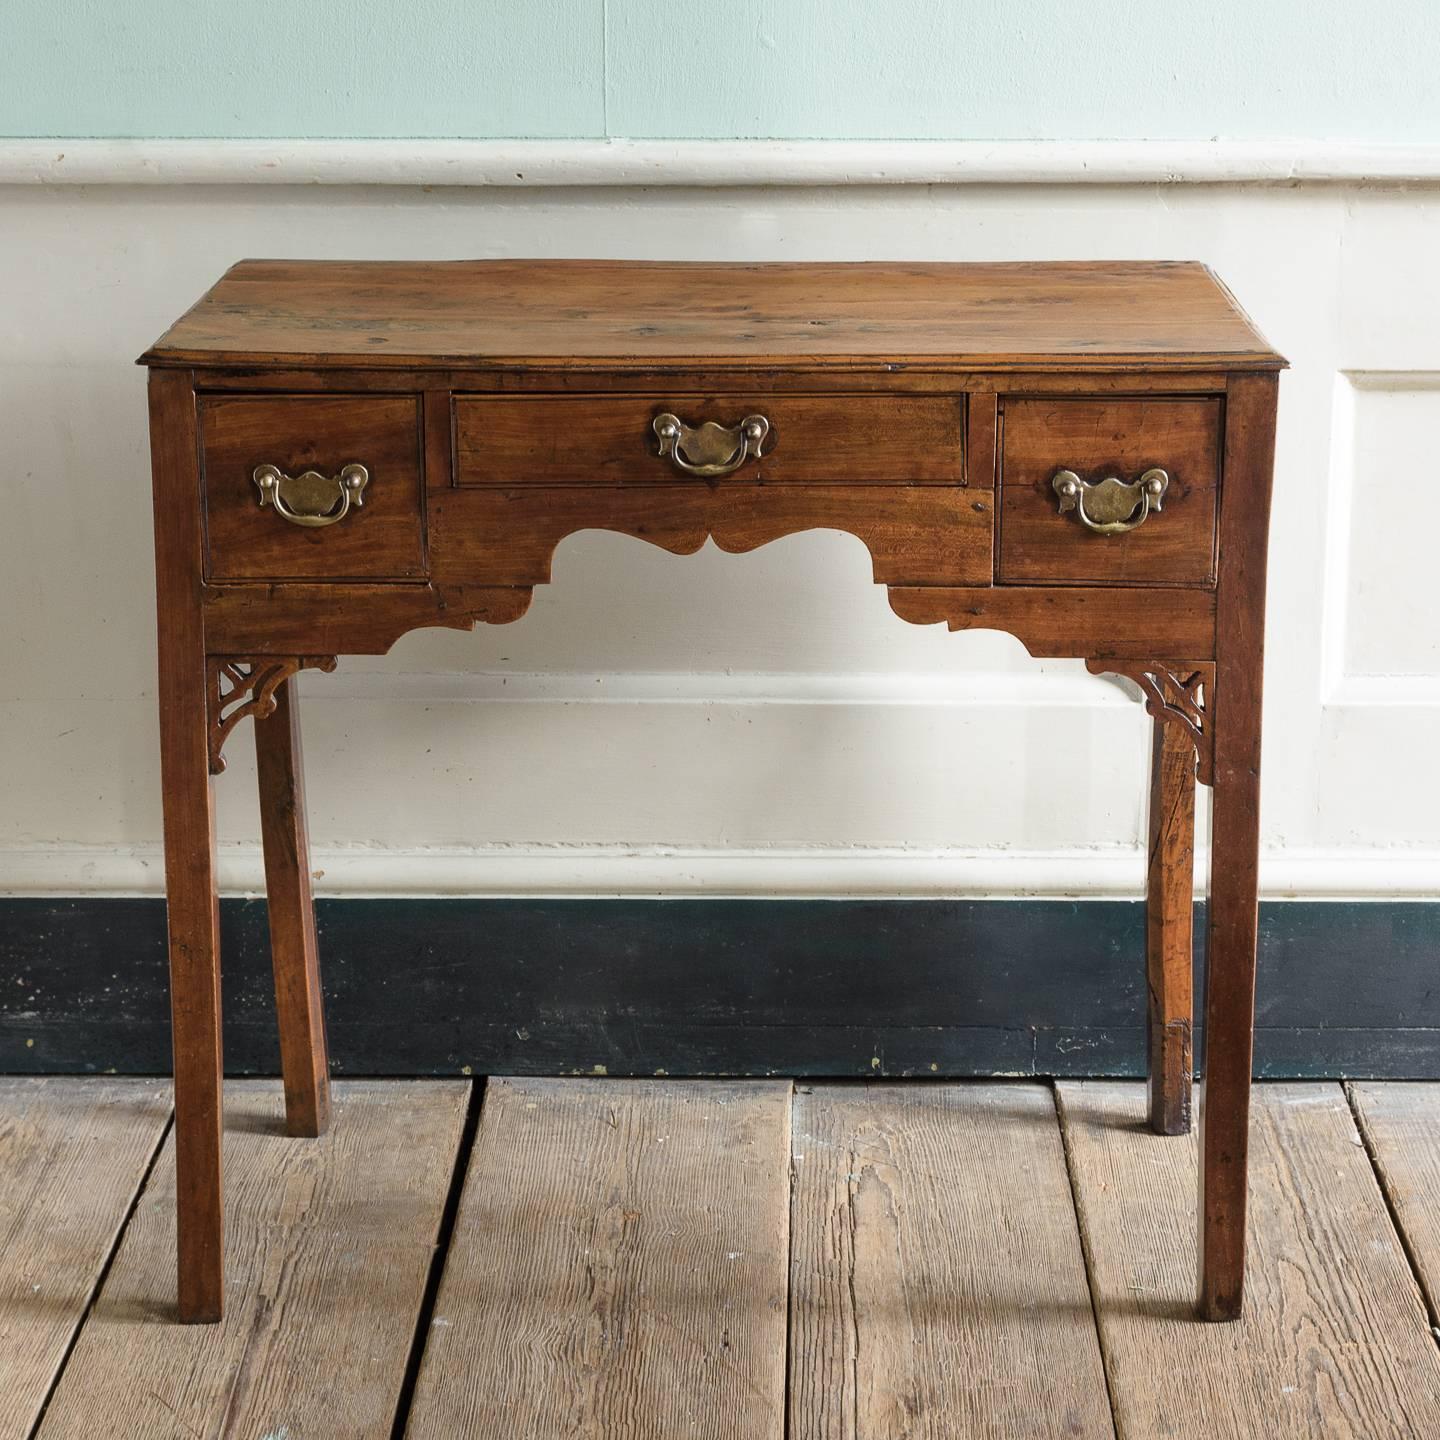 A George III yew wood and cherrywood lowboy with three drawers above Cupid’s bow frieze with fret cut brackets.

Yew is a native timber which was highly prized by cabinet makers in the eighteenth century and often used for the finest country-made